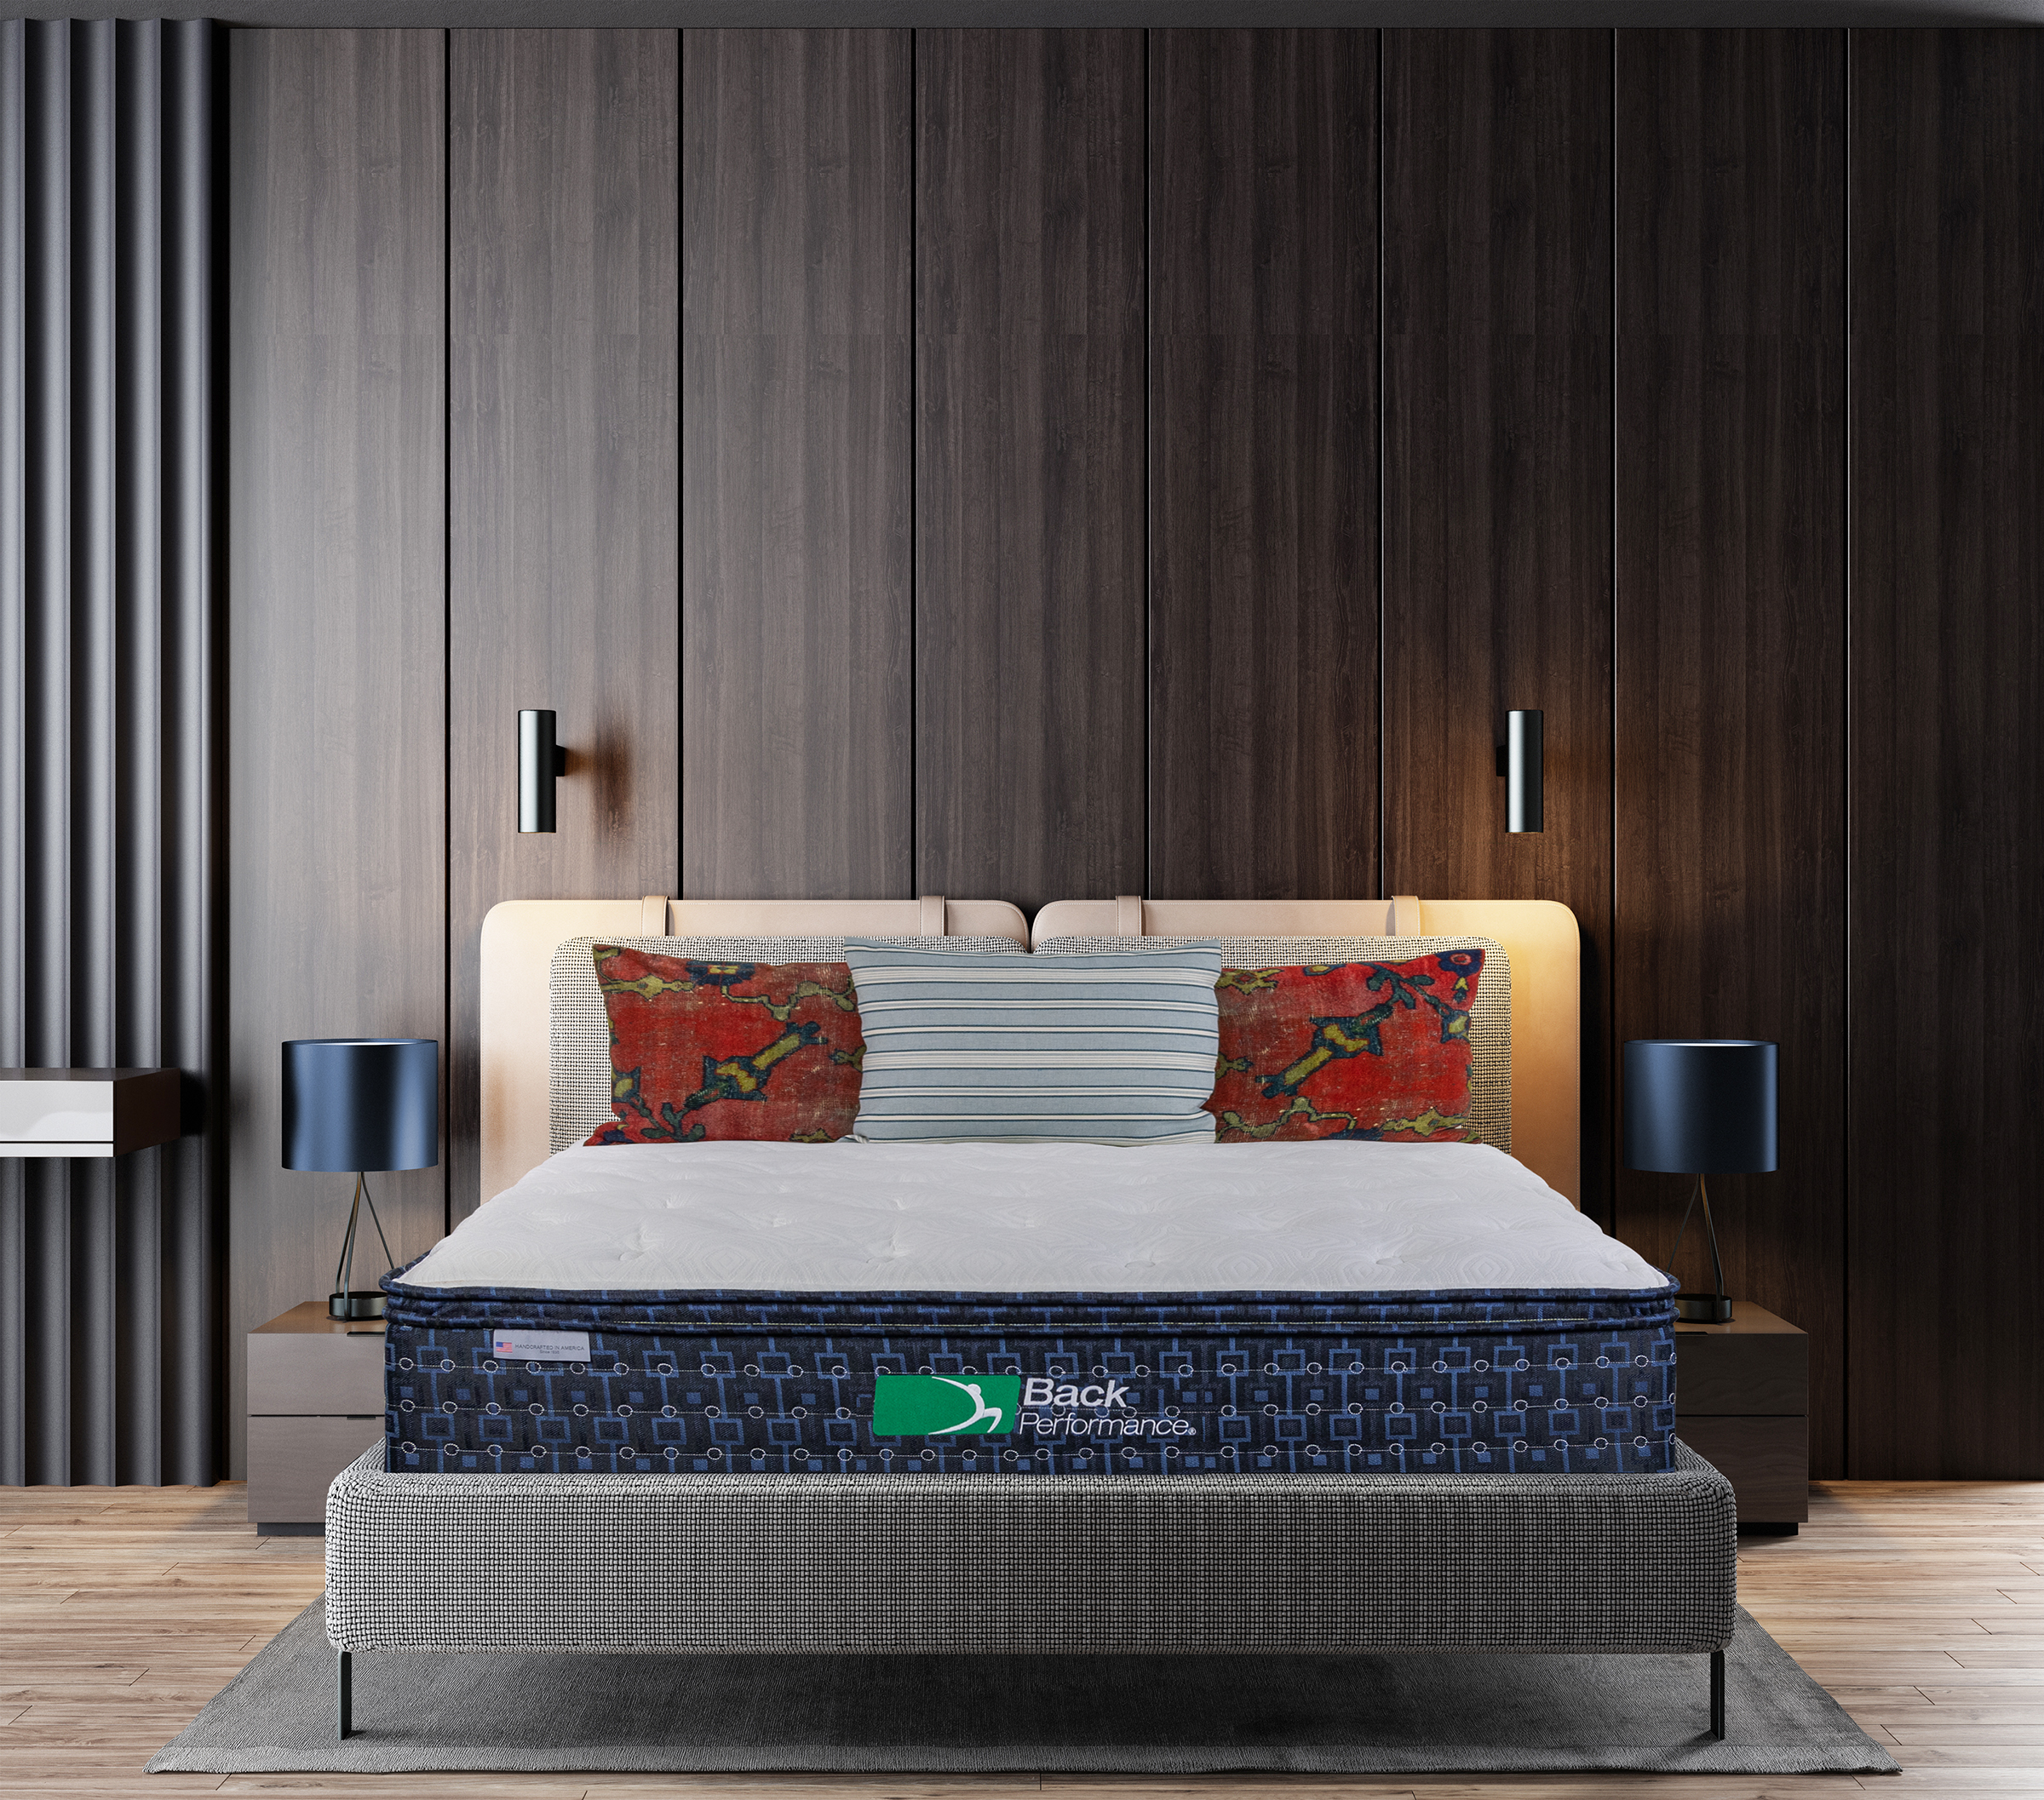 Black modern and retro-style bedroom with black and dark materials. 3d rendering.